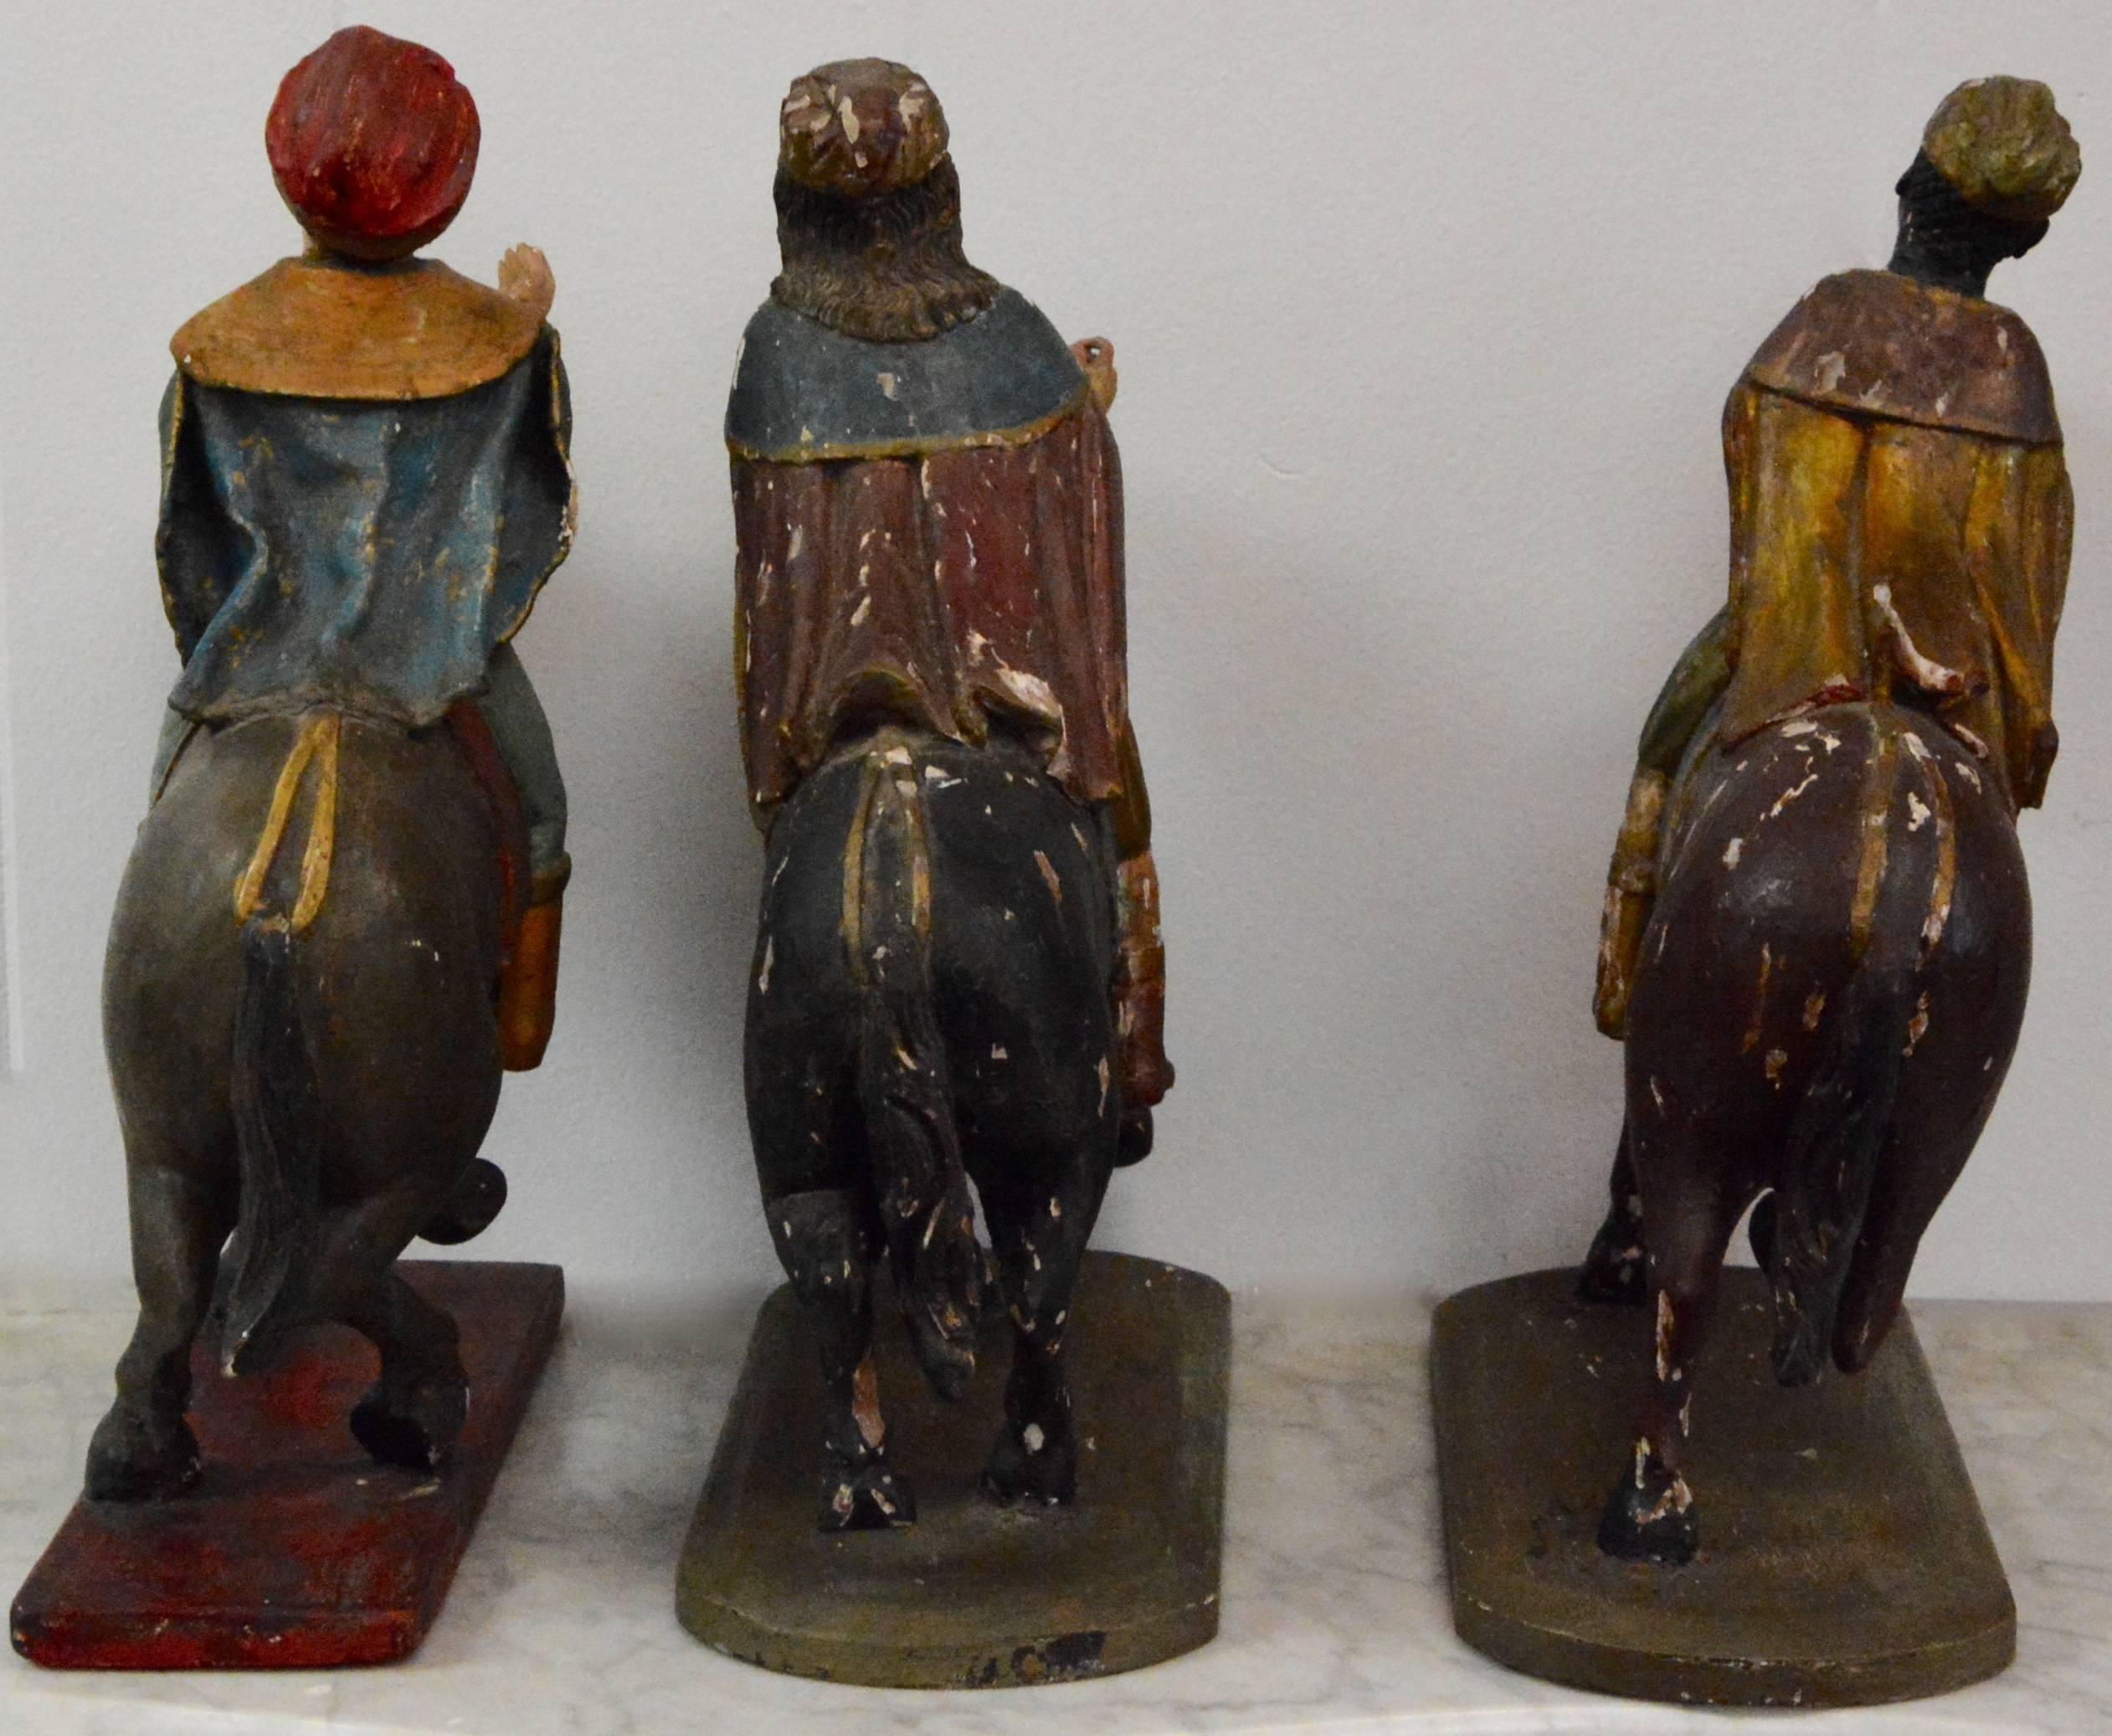 These figures depict the three wise men on horseback. Each figure has polychrome paint decoration on carved wood and glass inset edges. These are from a private Manhattan residence of the Pierre Hotel in New York City. They emit a beauty from days